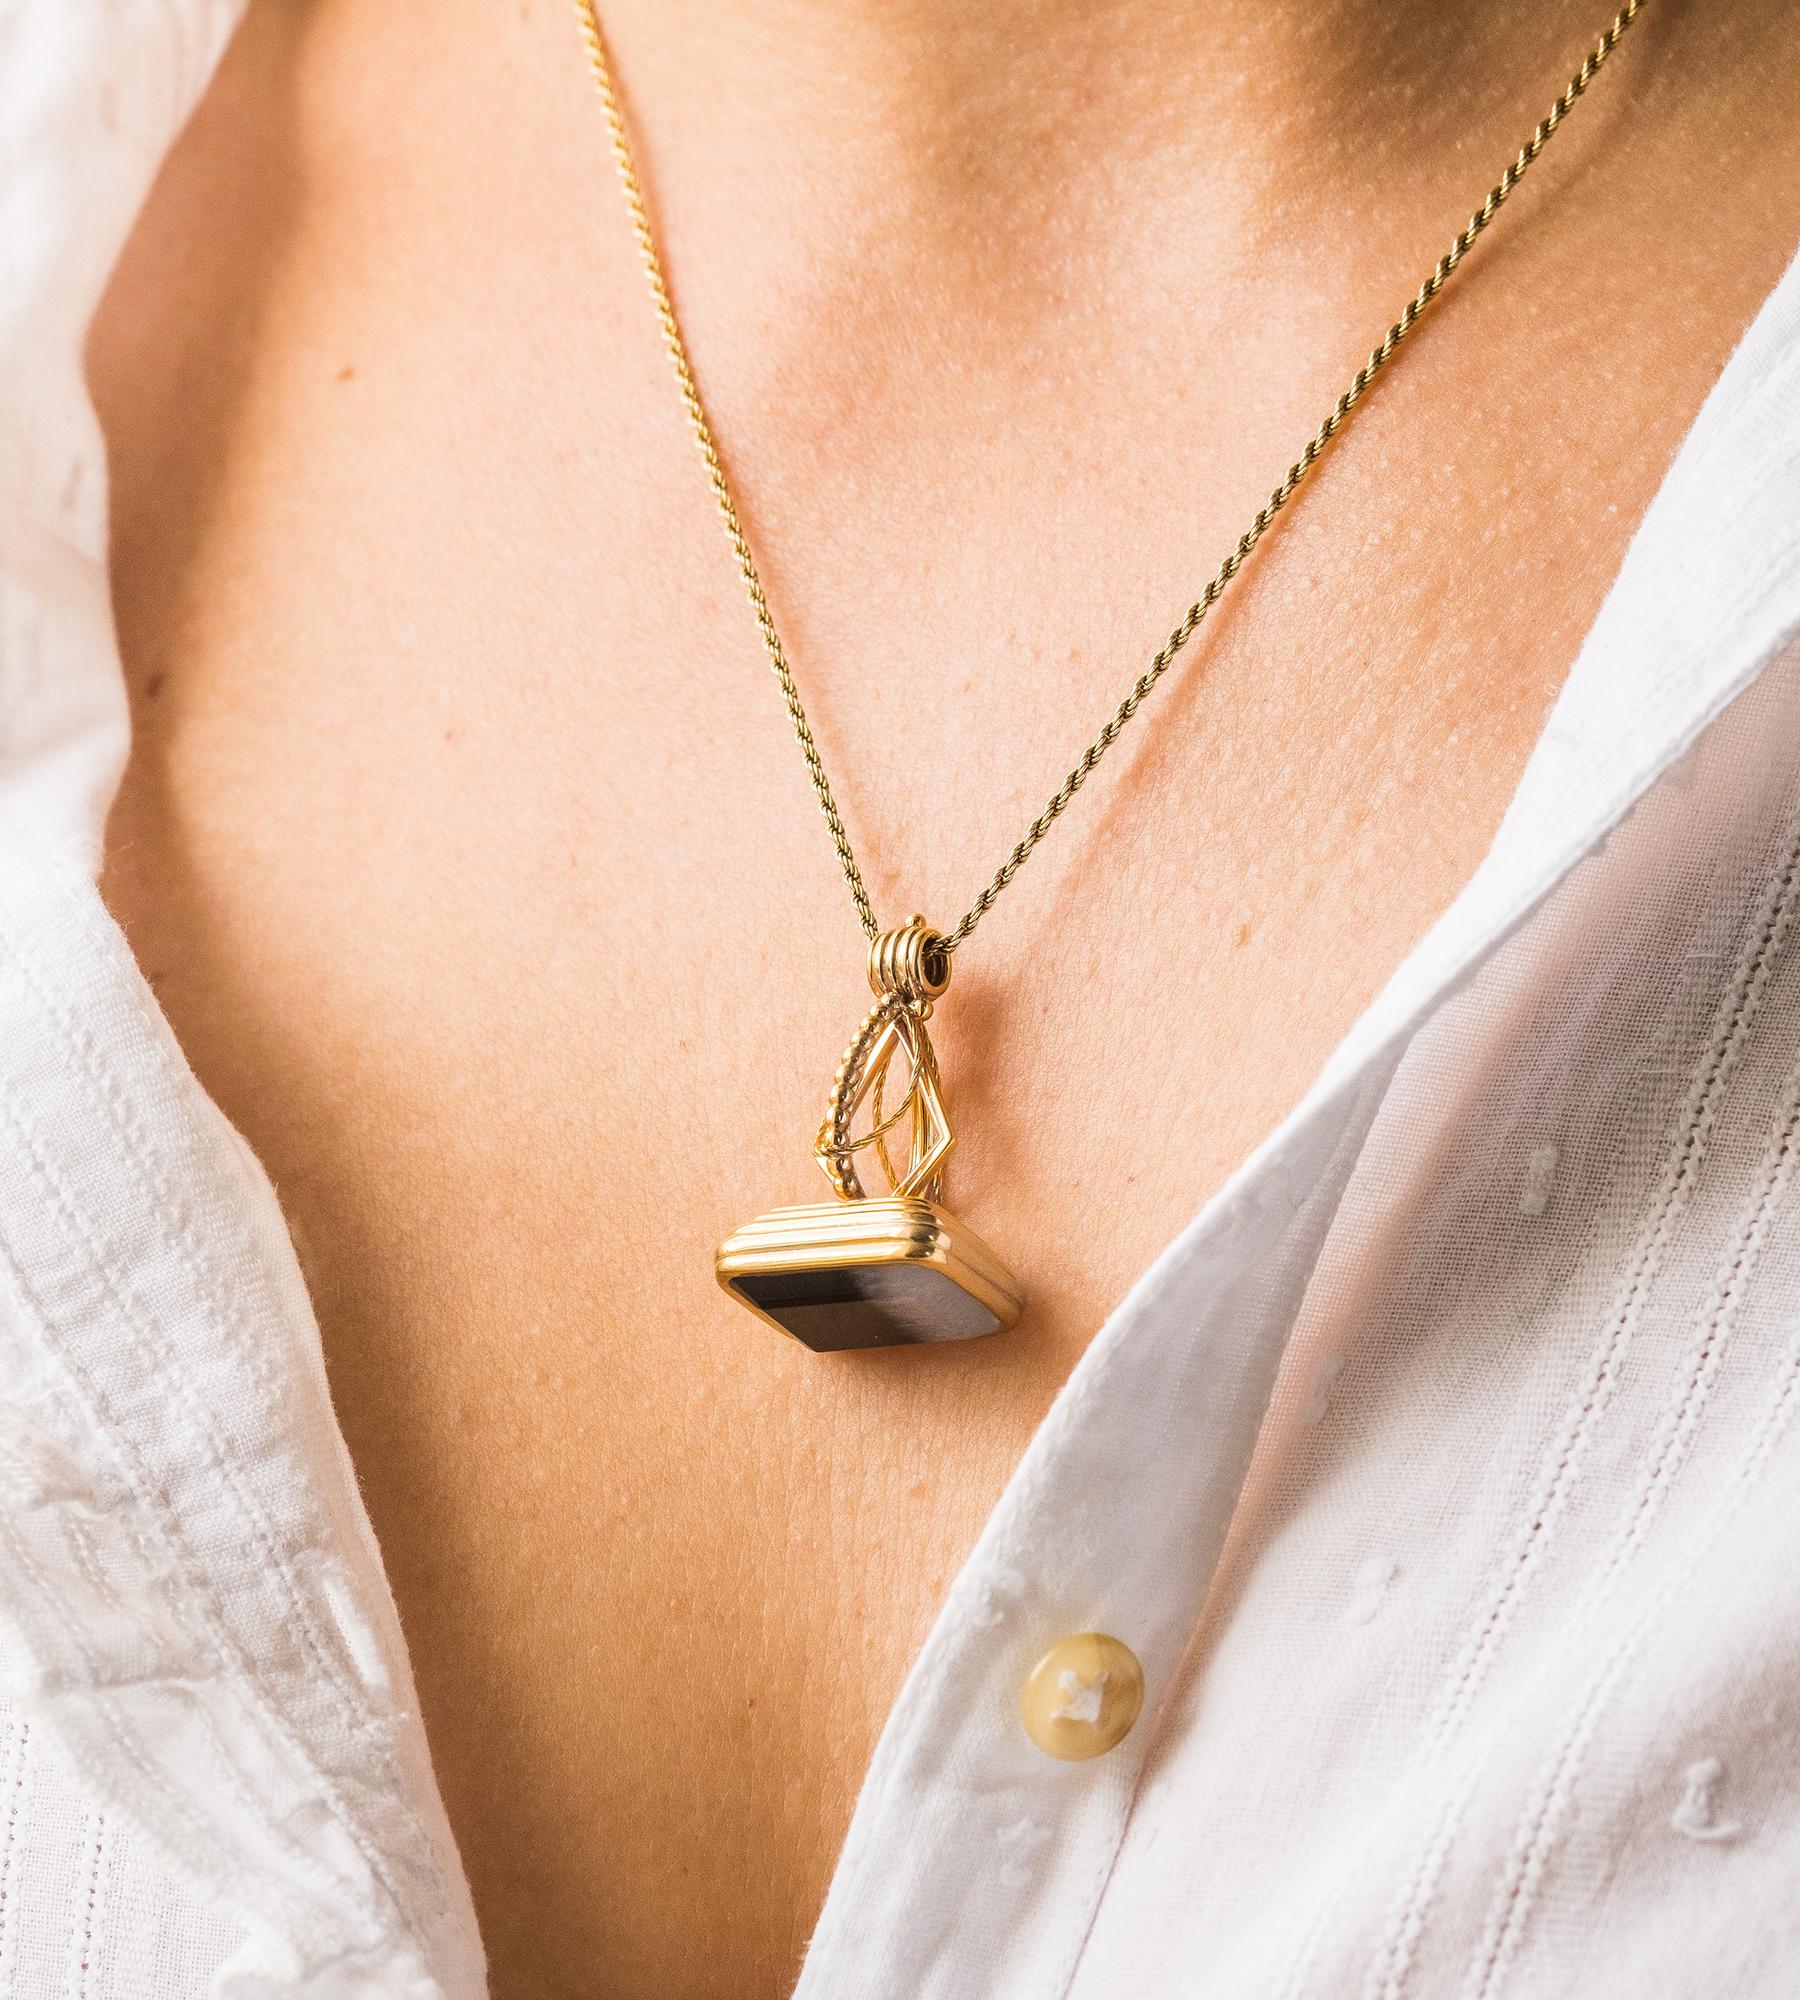 Handmade in 18ct gold, the Fleur Fairfax Gemstone Fob takes it’s design inspiration from an original decorative fob seal circa 1835.

In the Georgian age, fobs were ubiquitous male accessories. 
Reimagined by Fleur Fairfax as a women's fine